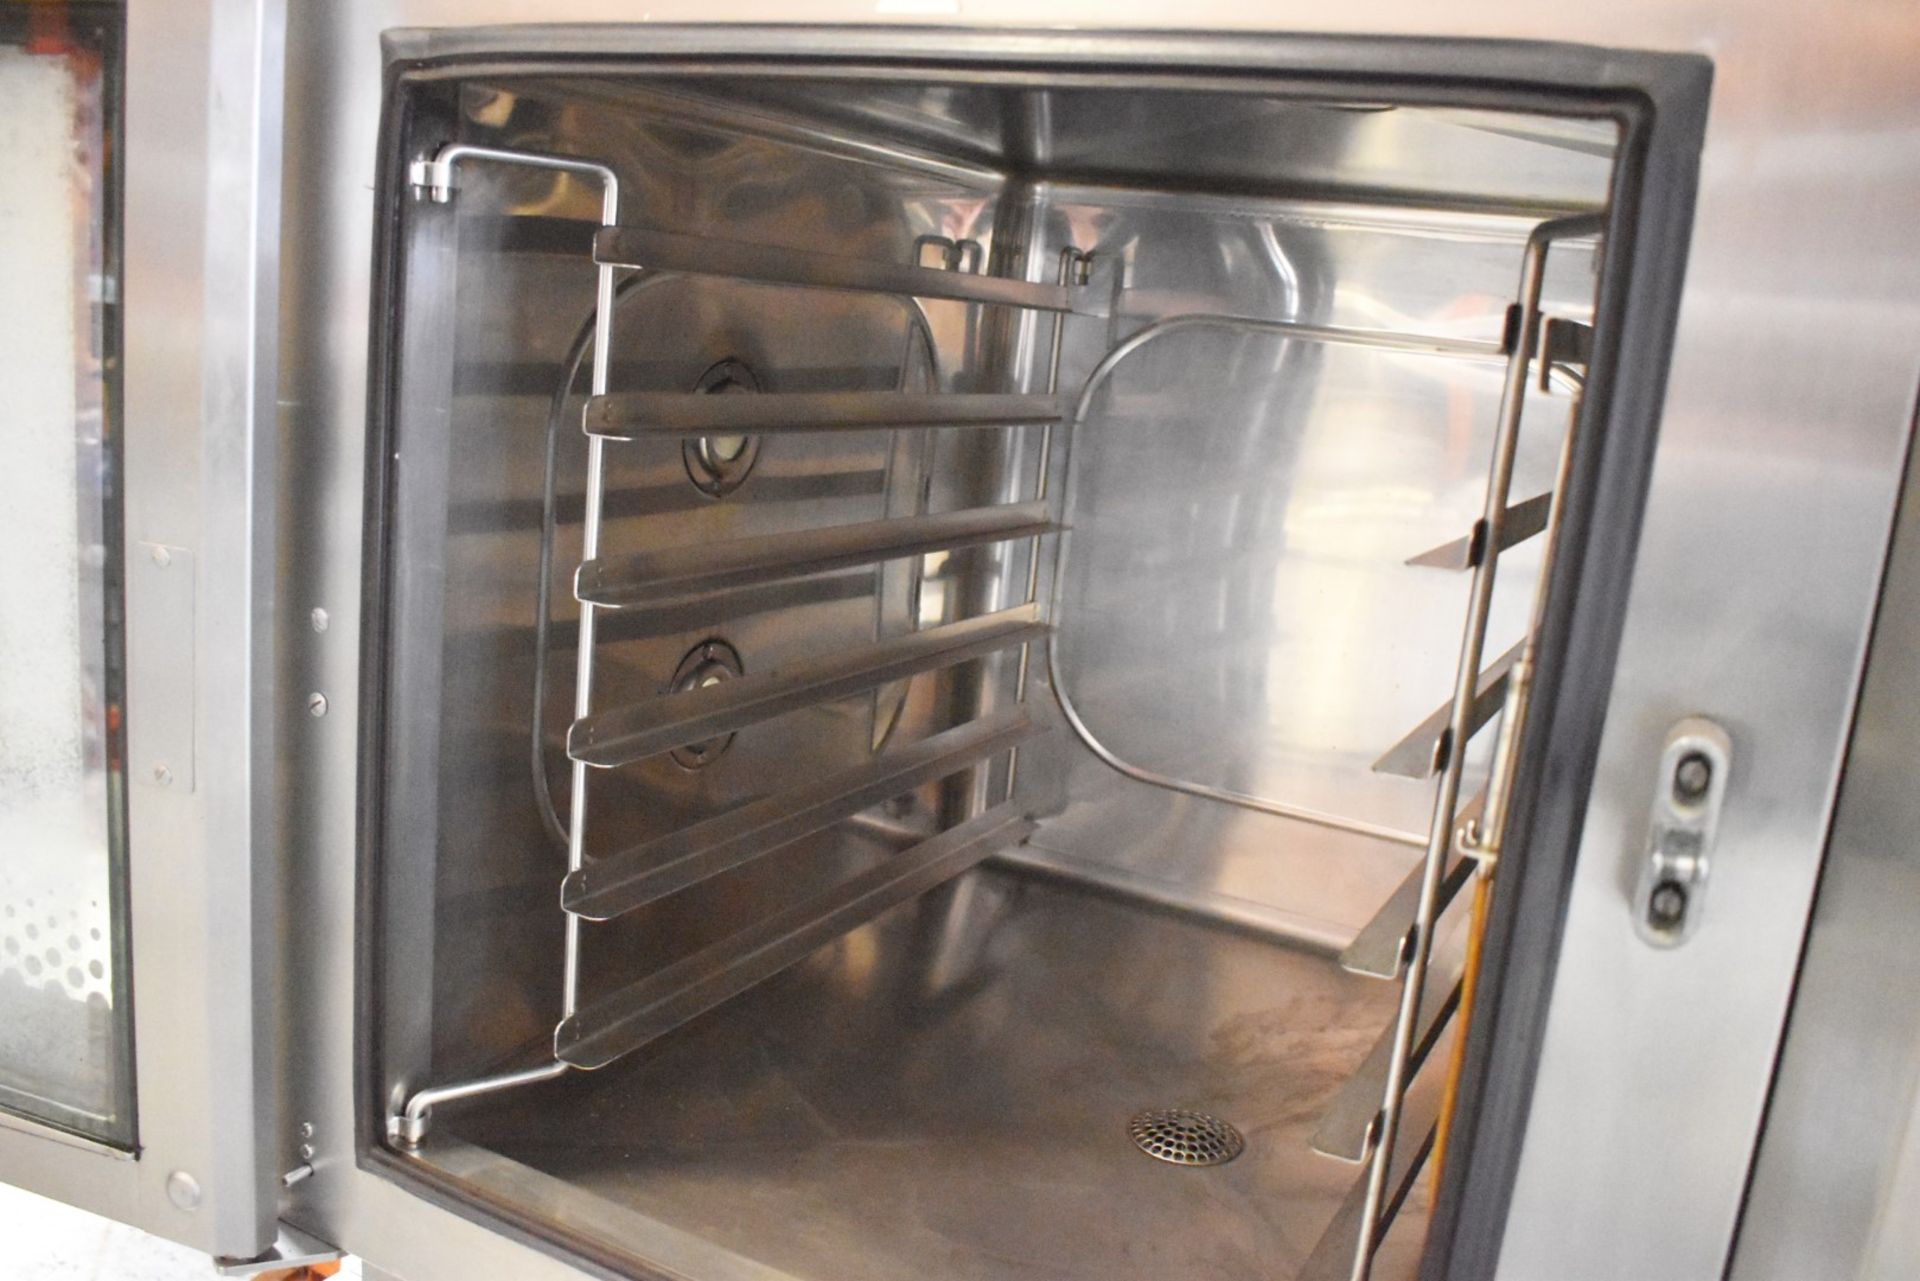 1 x Leventi Combimat Mastermind Steamer Oven - 6 Grid - 3 Phase - Includes Mobile Pedestal Base With - Image 12 of 14